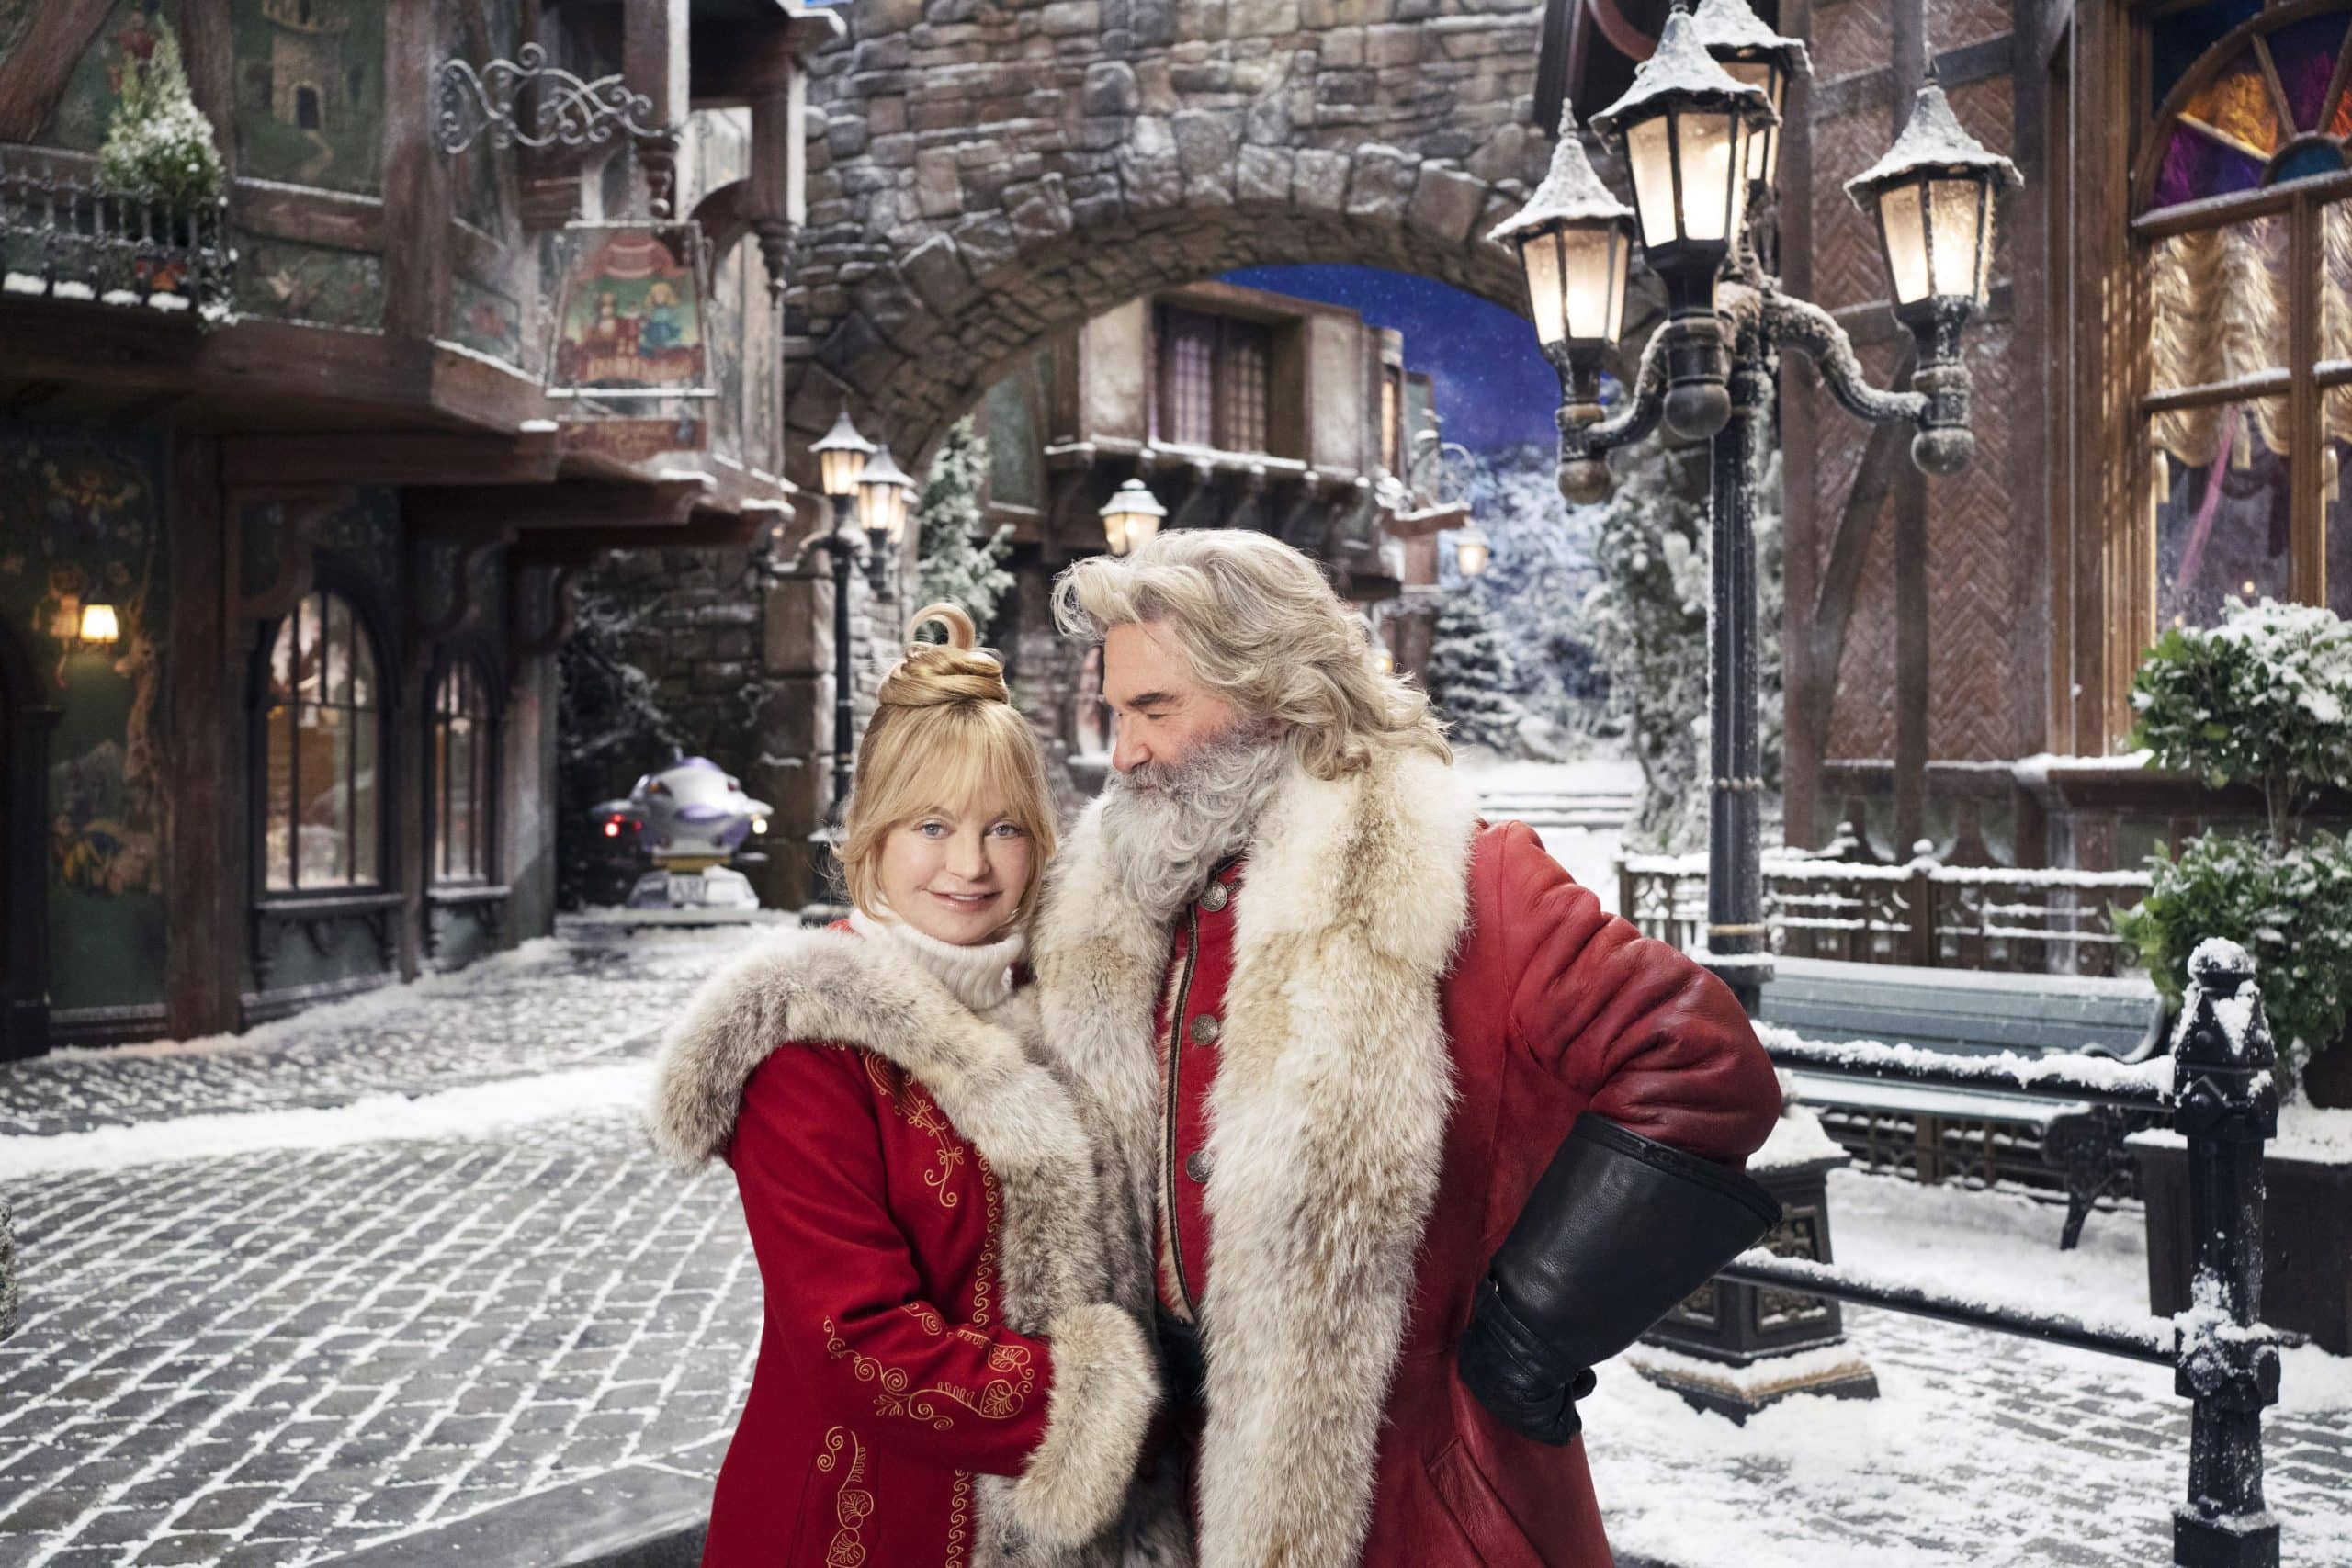 THE CHRISTMAS CHRONICLES 2, from left: Goldie Hawn as Mrs. Claus, Kurt Russell as Santa Claus, 2020